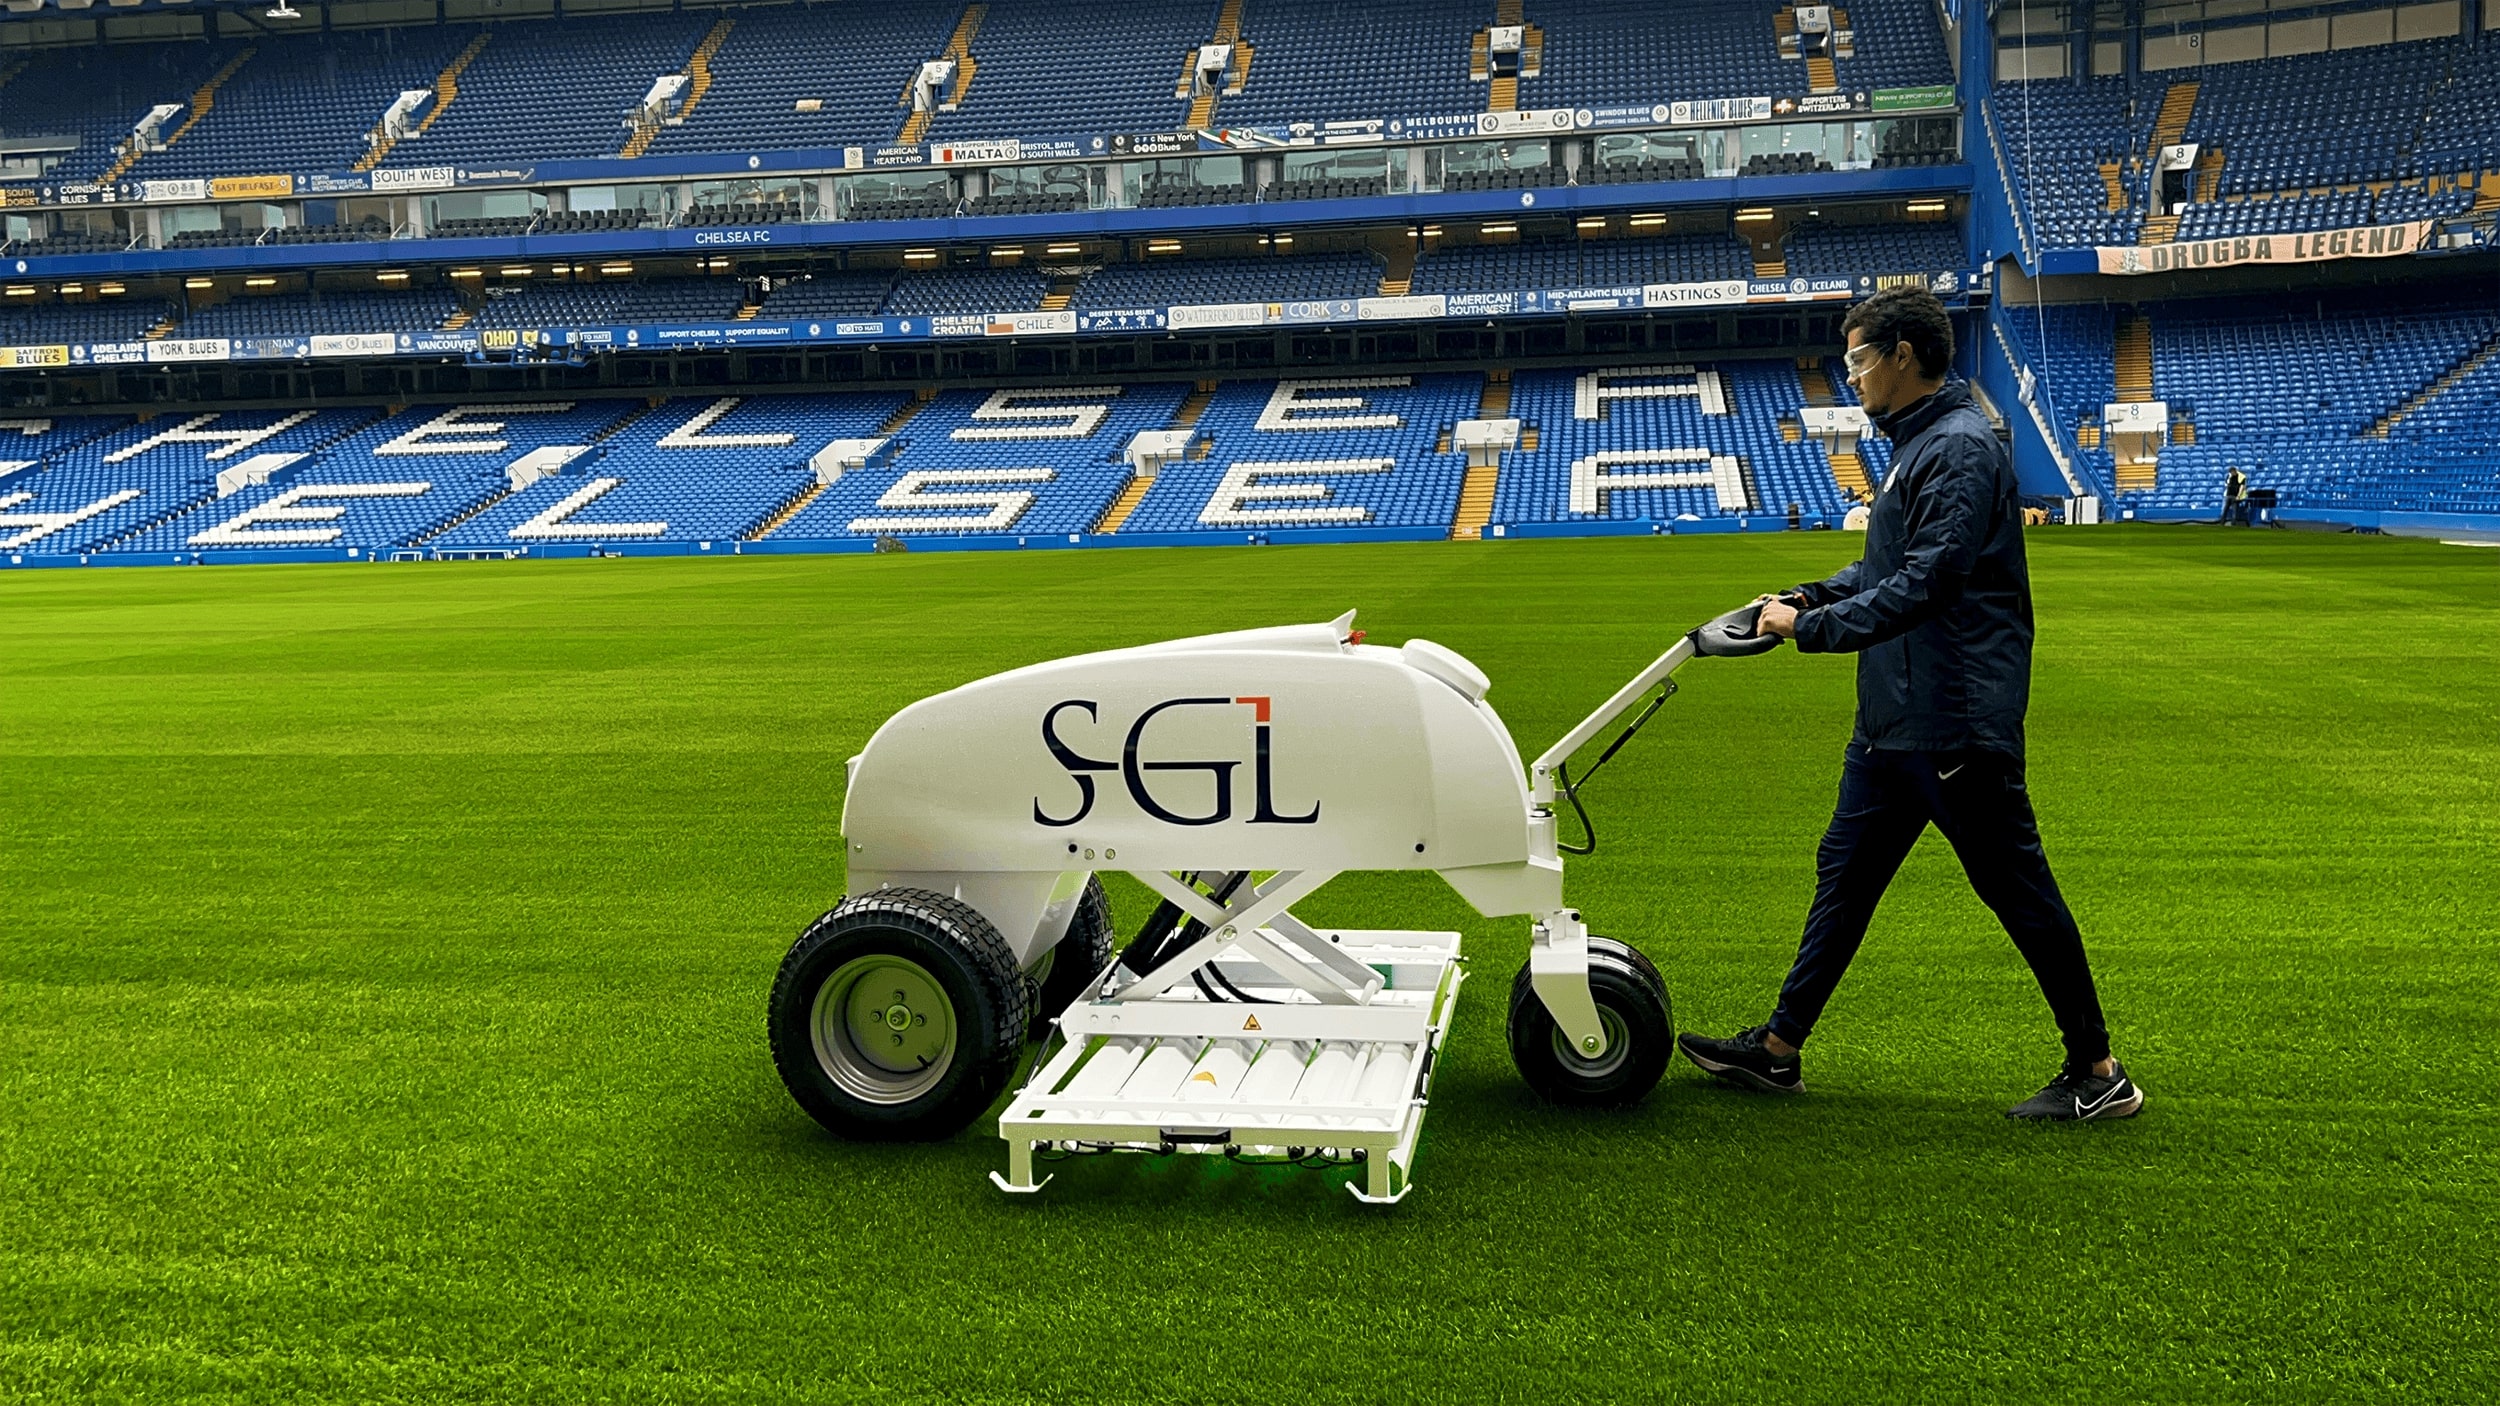 The SGL UVC180 in action treating the playing surface of Chelsea FC with plant-friendly UV-C technology